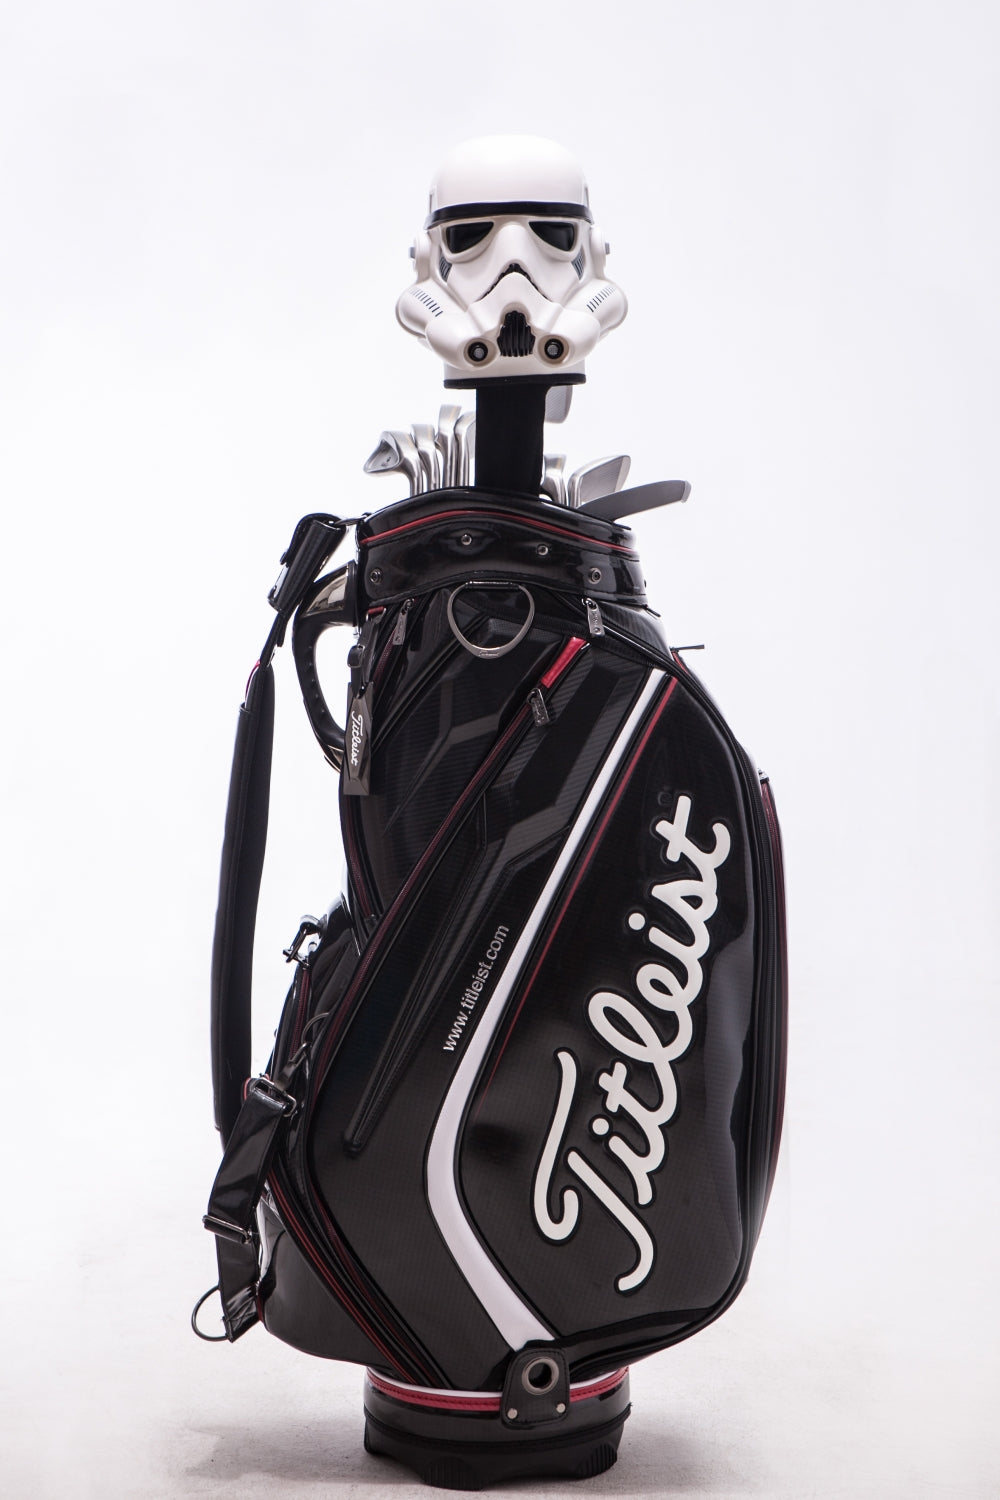 Custom Golf Head Covers: Your name, your logo, your choice of colors!